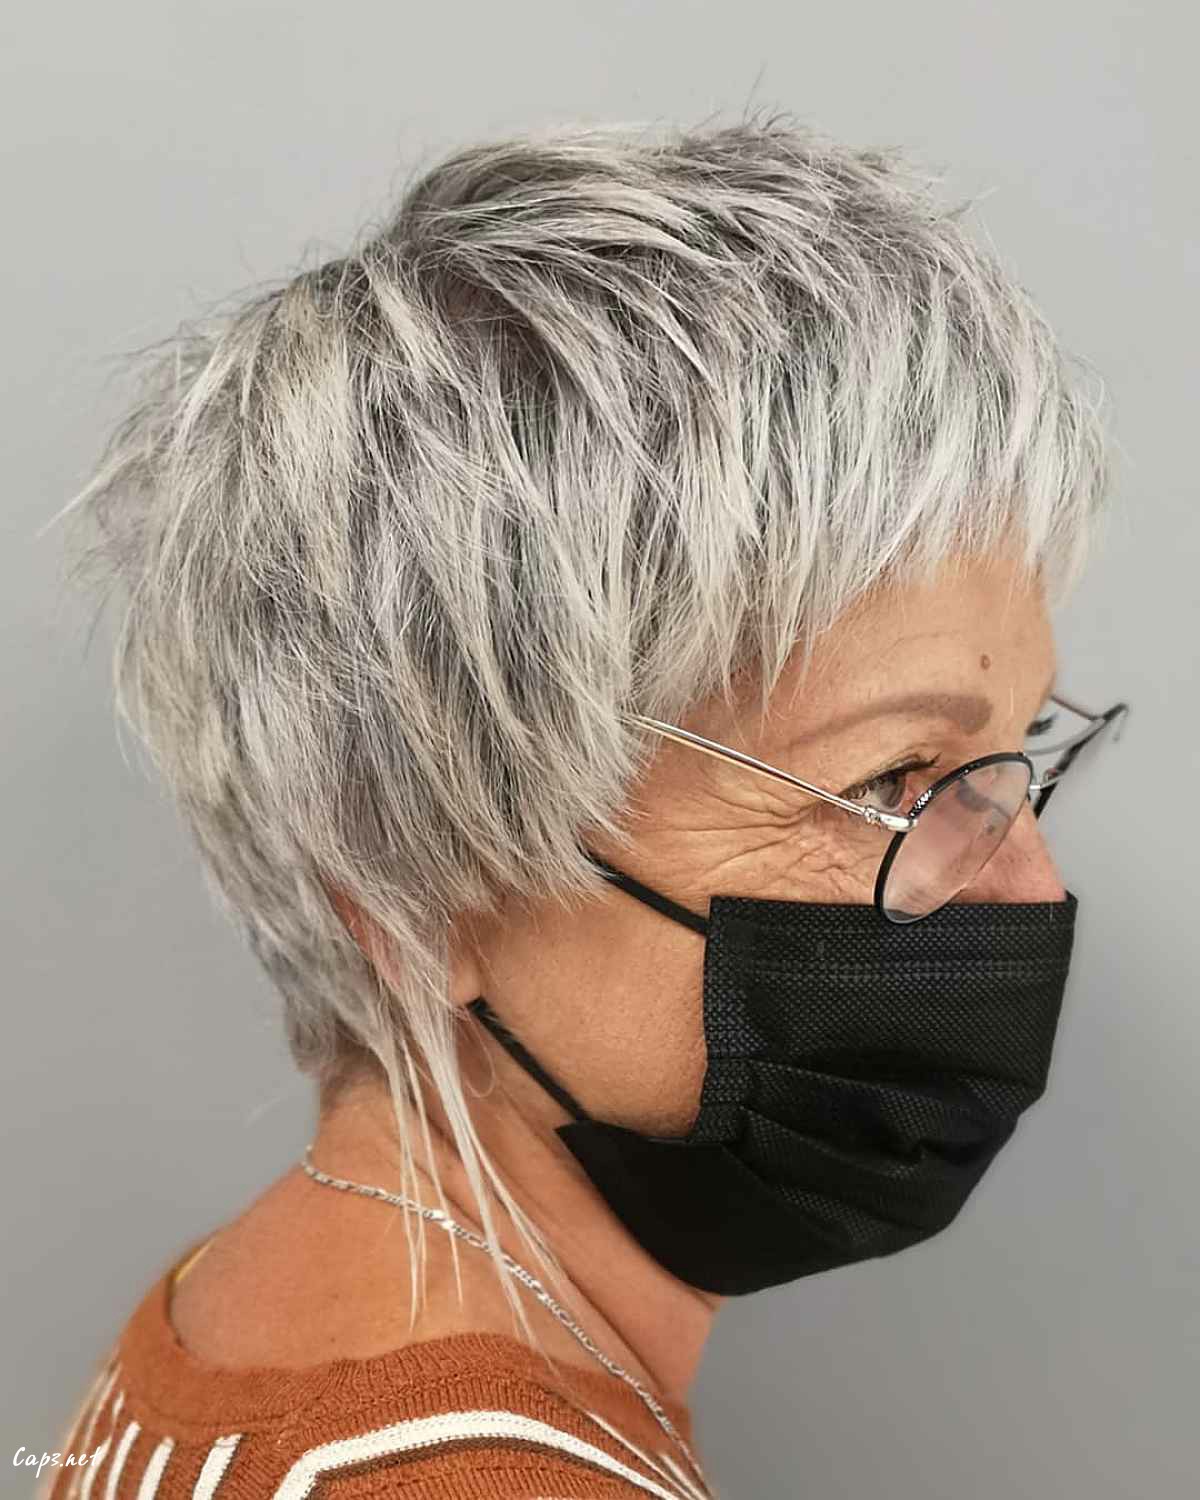 60 year old with a textured shag crop